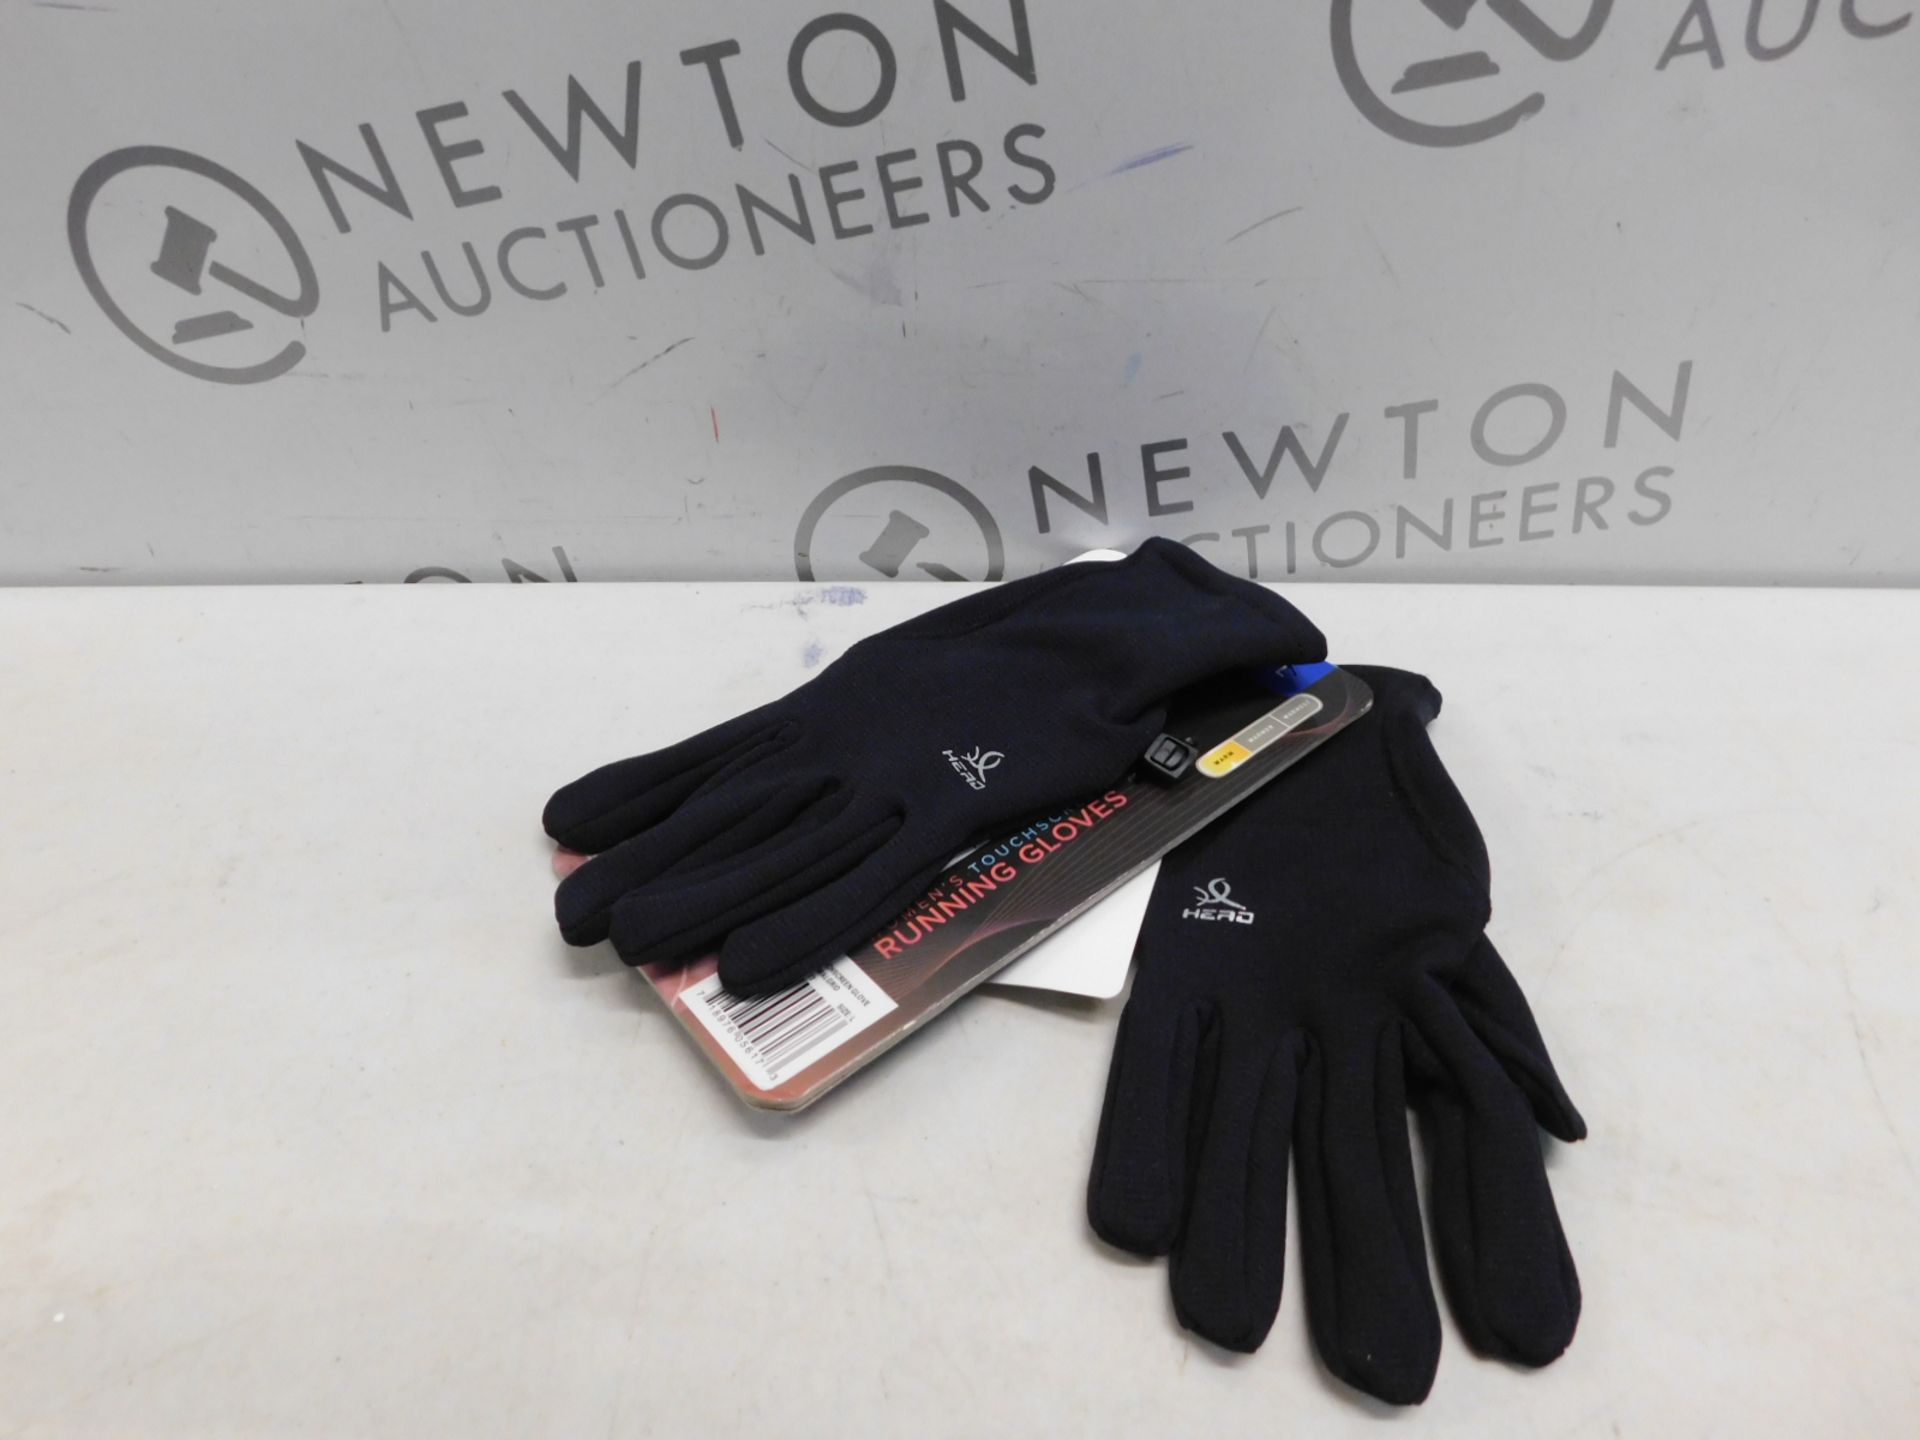 1 PACK OF HEAD ULTRAFIT TOUCH SCREEN RUNNING GLOVES SIZE L RRP £24.99